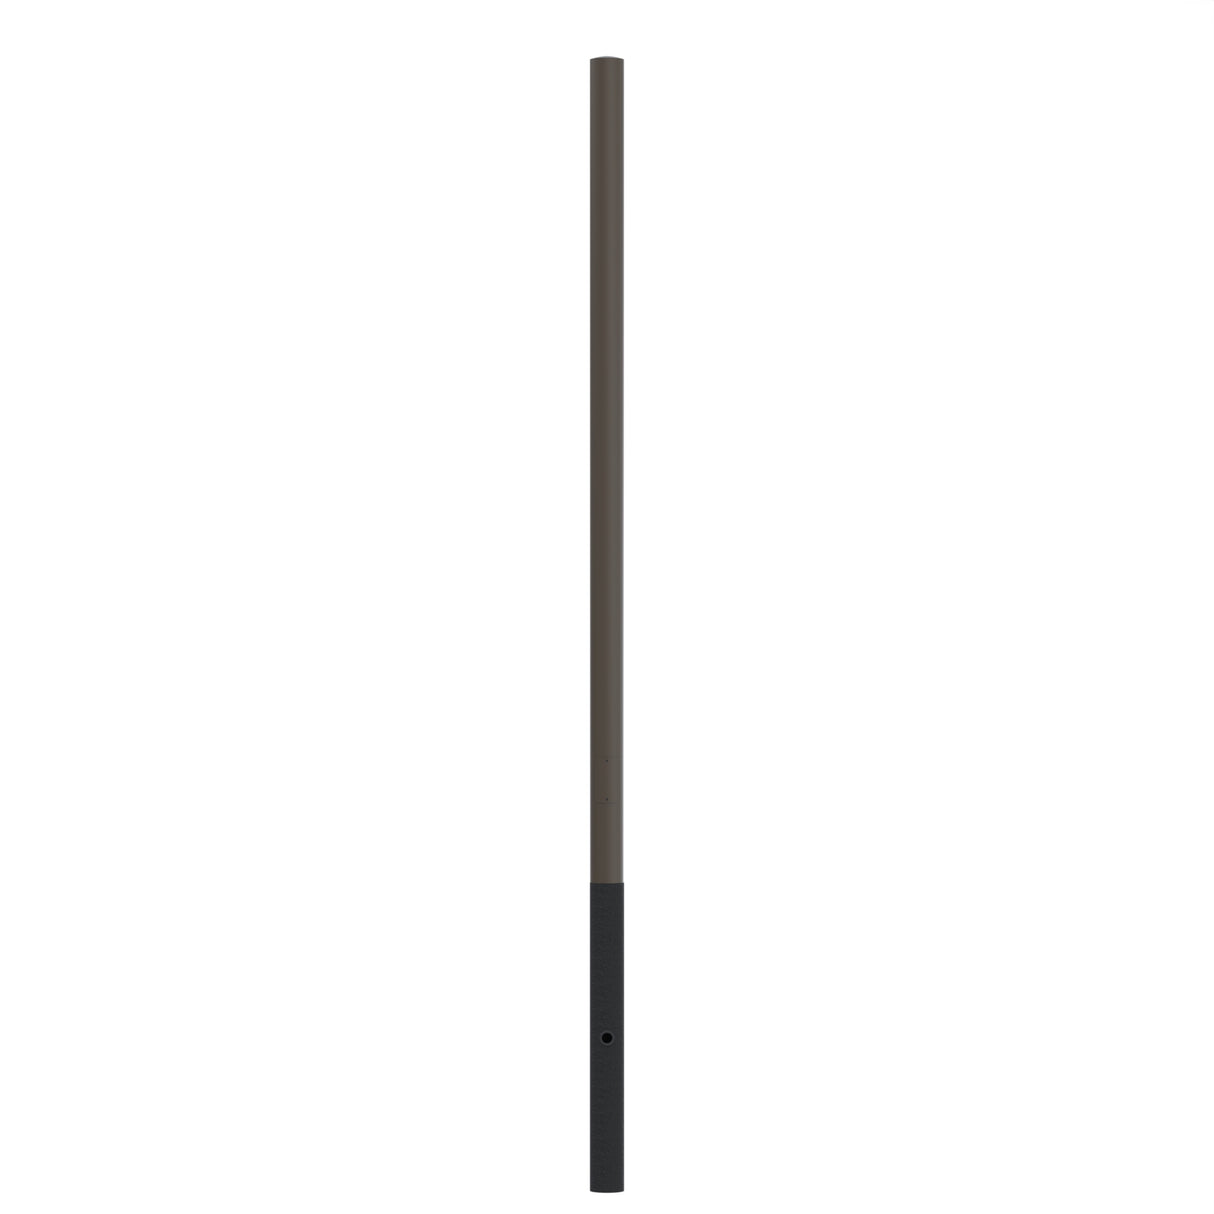 25' Above Grade x 6.0" OD  x 0.188" Thick, Round Straight Aluminum, Direct Burial Light Pole